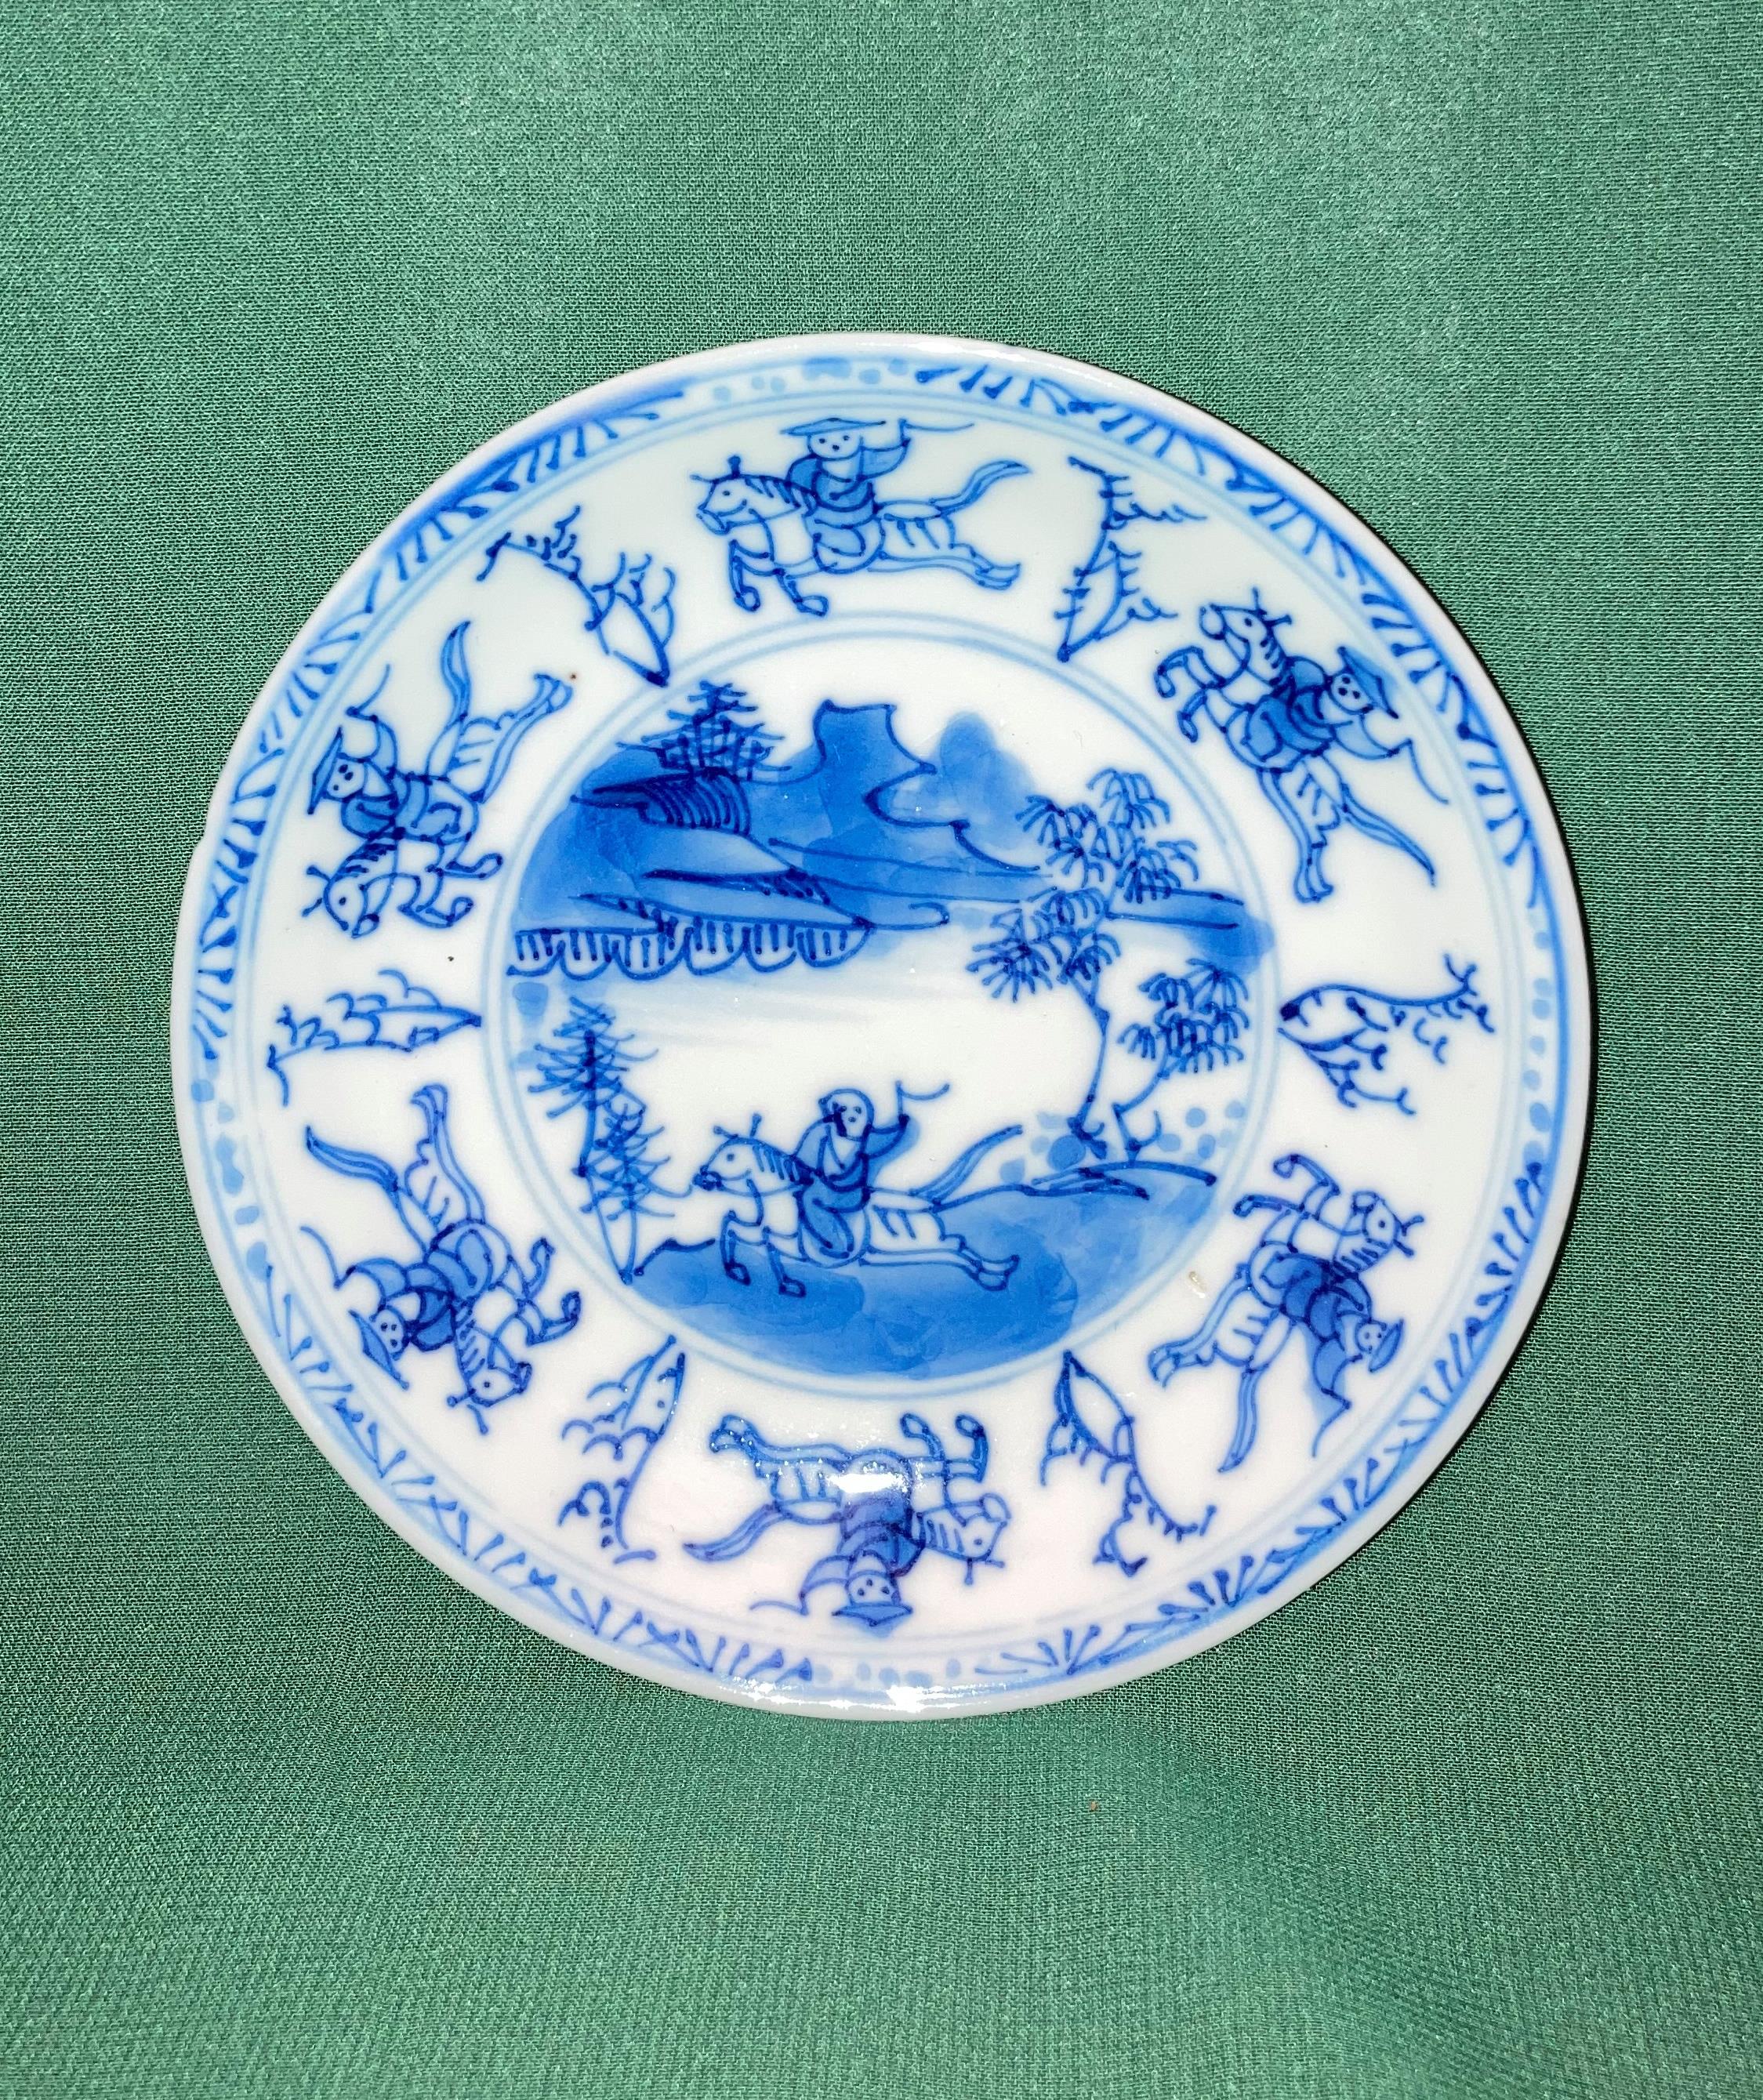 Rare antique blue and white Kangxi Chinese porcelain small plate (Circa 1680) with riding horsemen